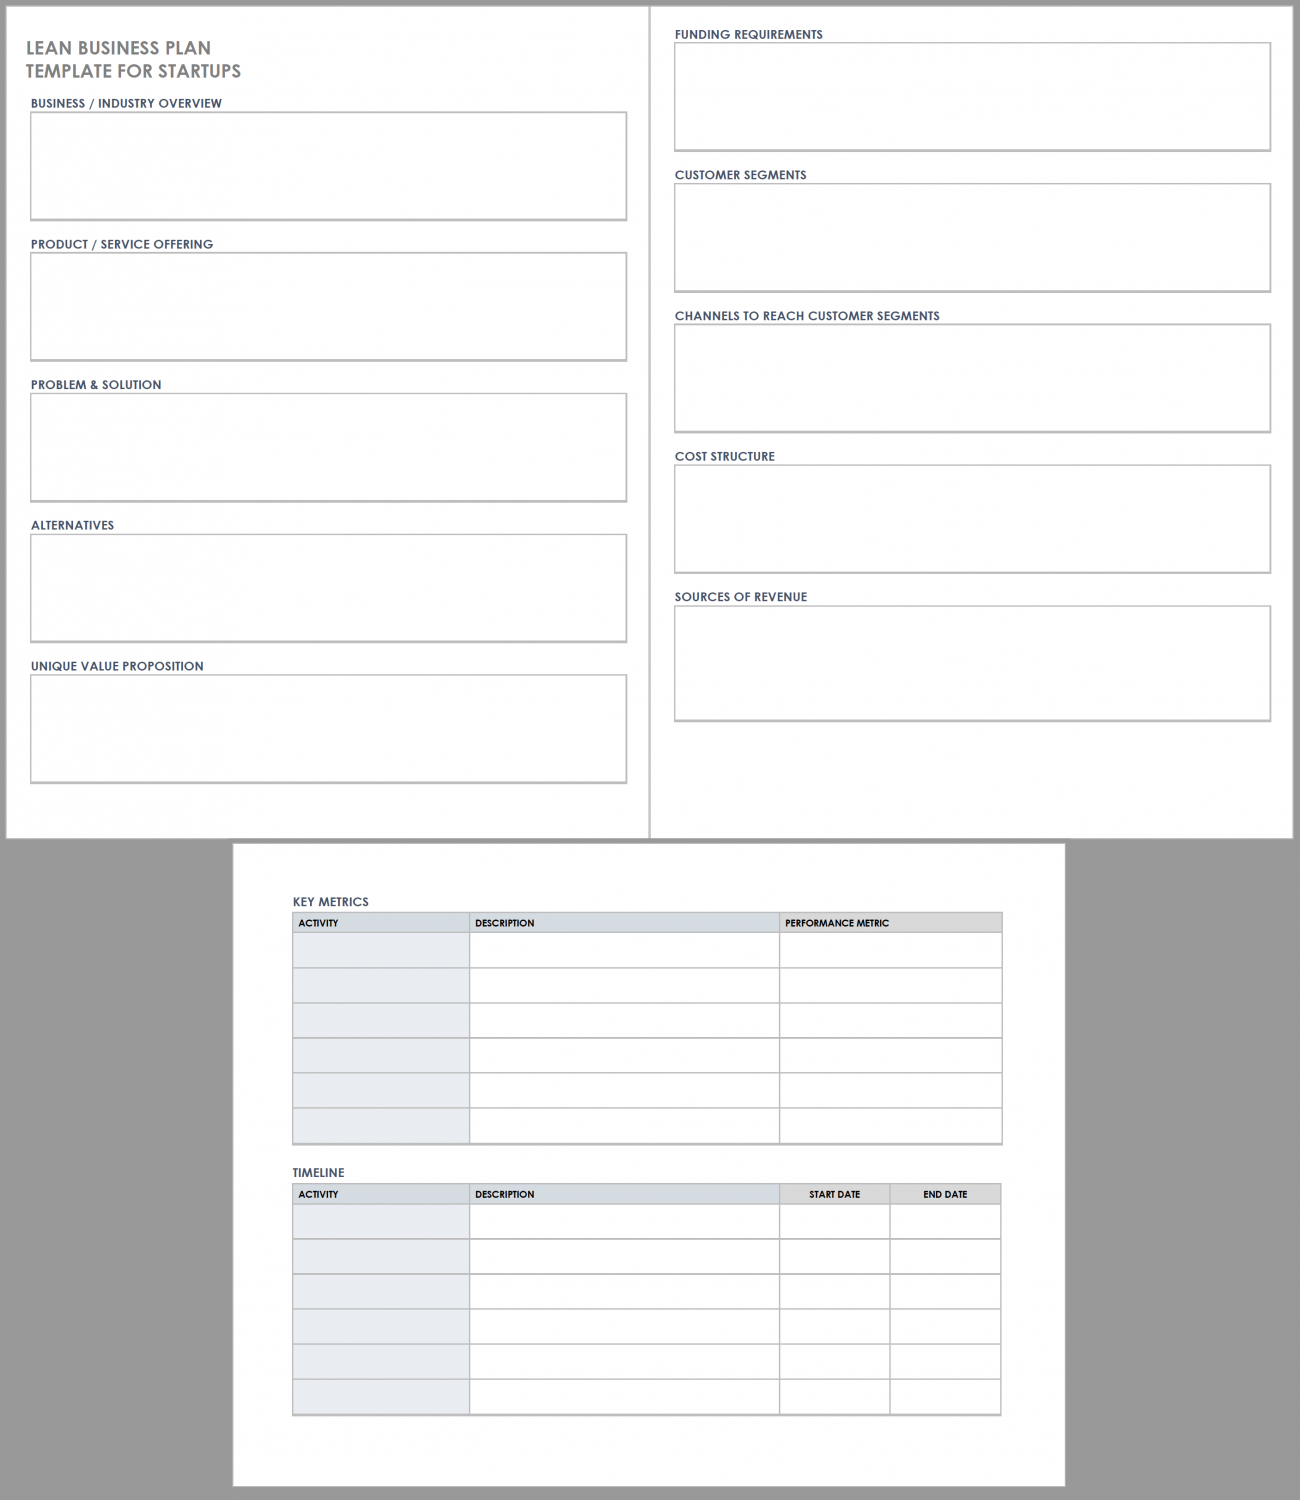 lean startup business plan template free